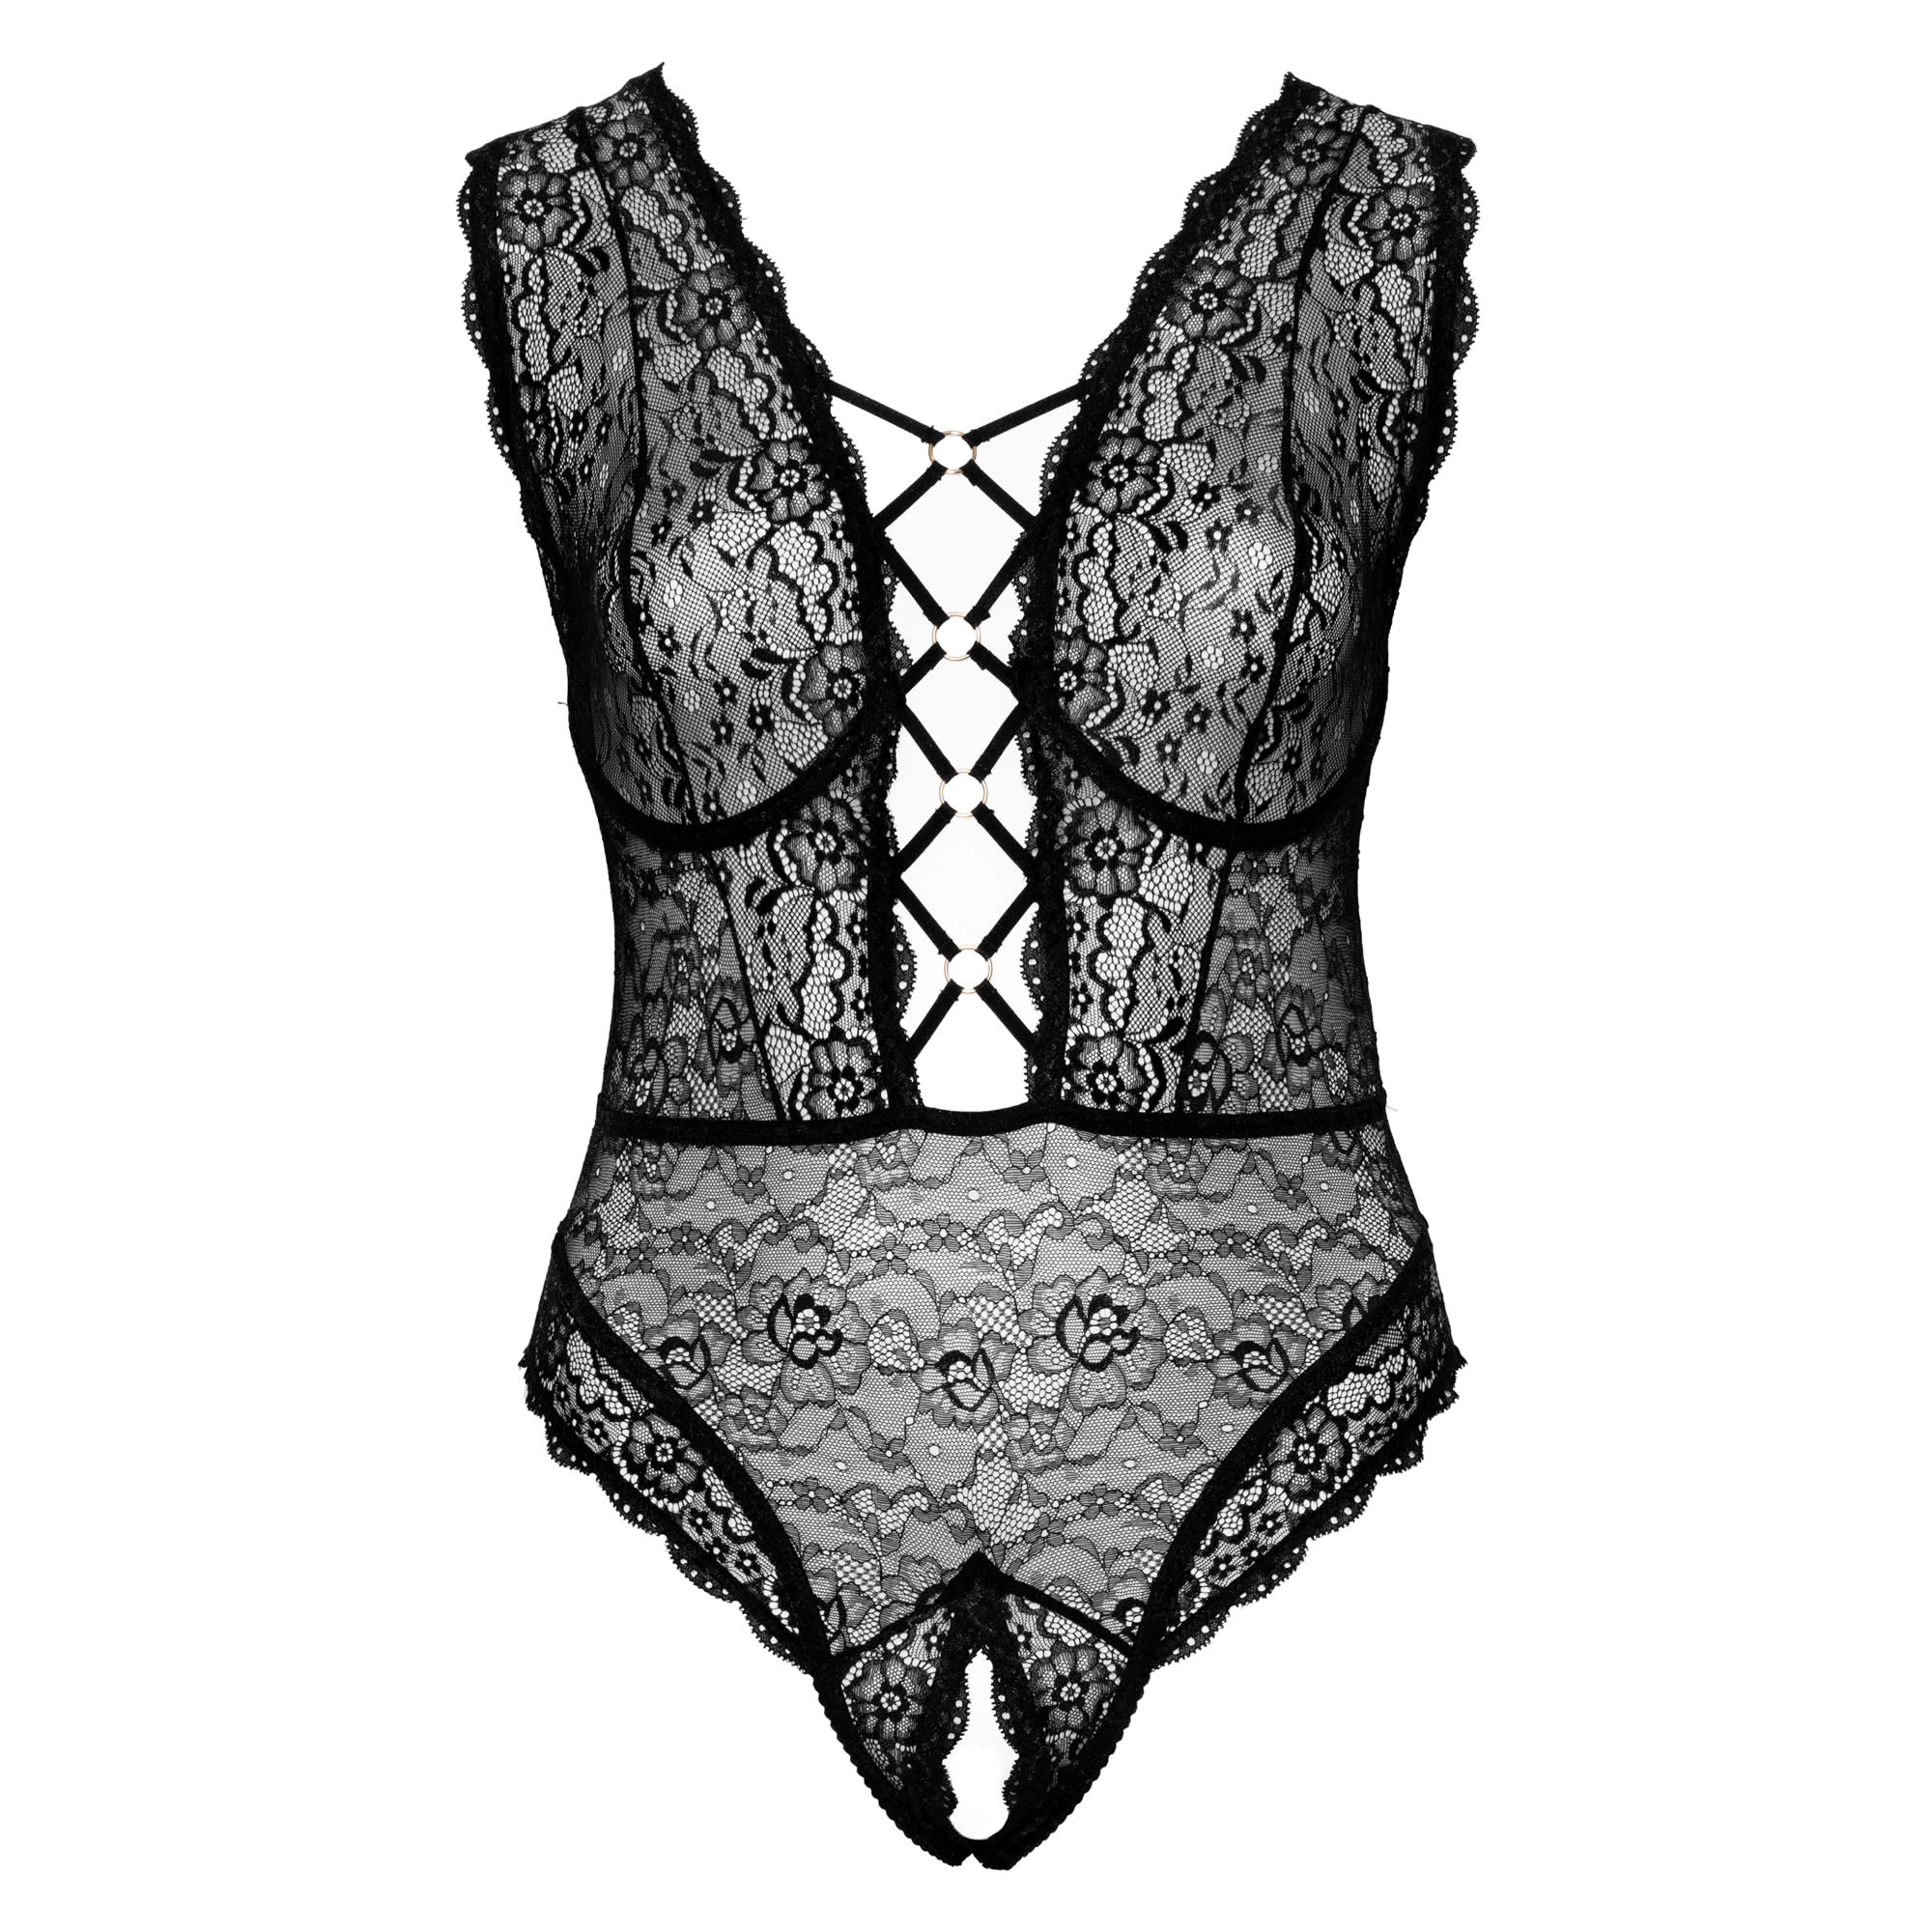 Plus Size Lace Body with Deep Cleavage